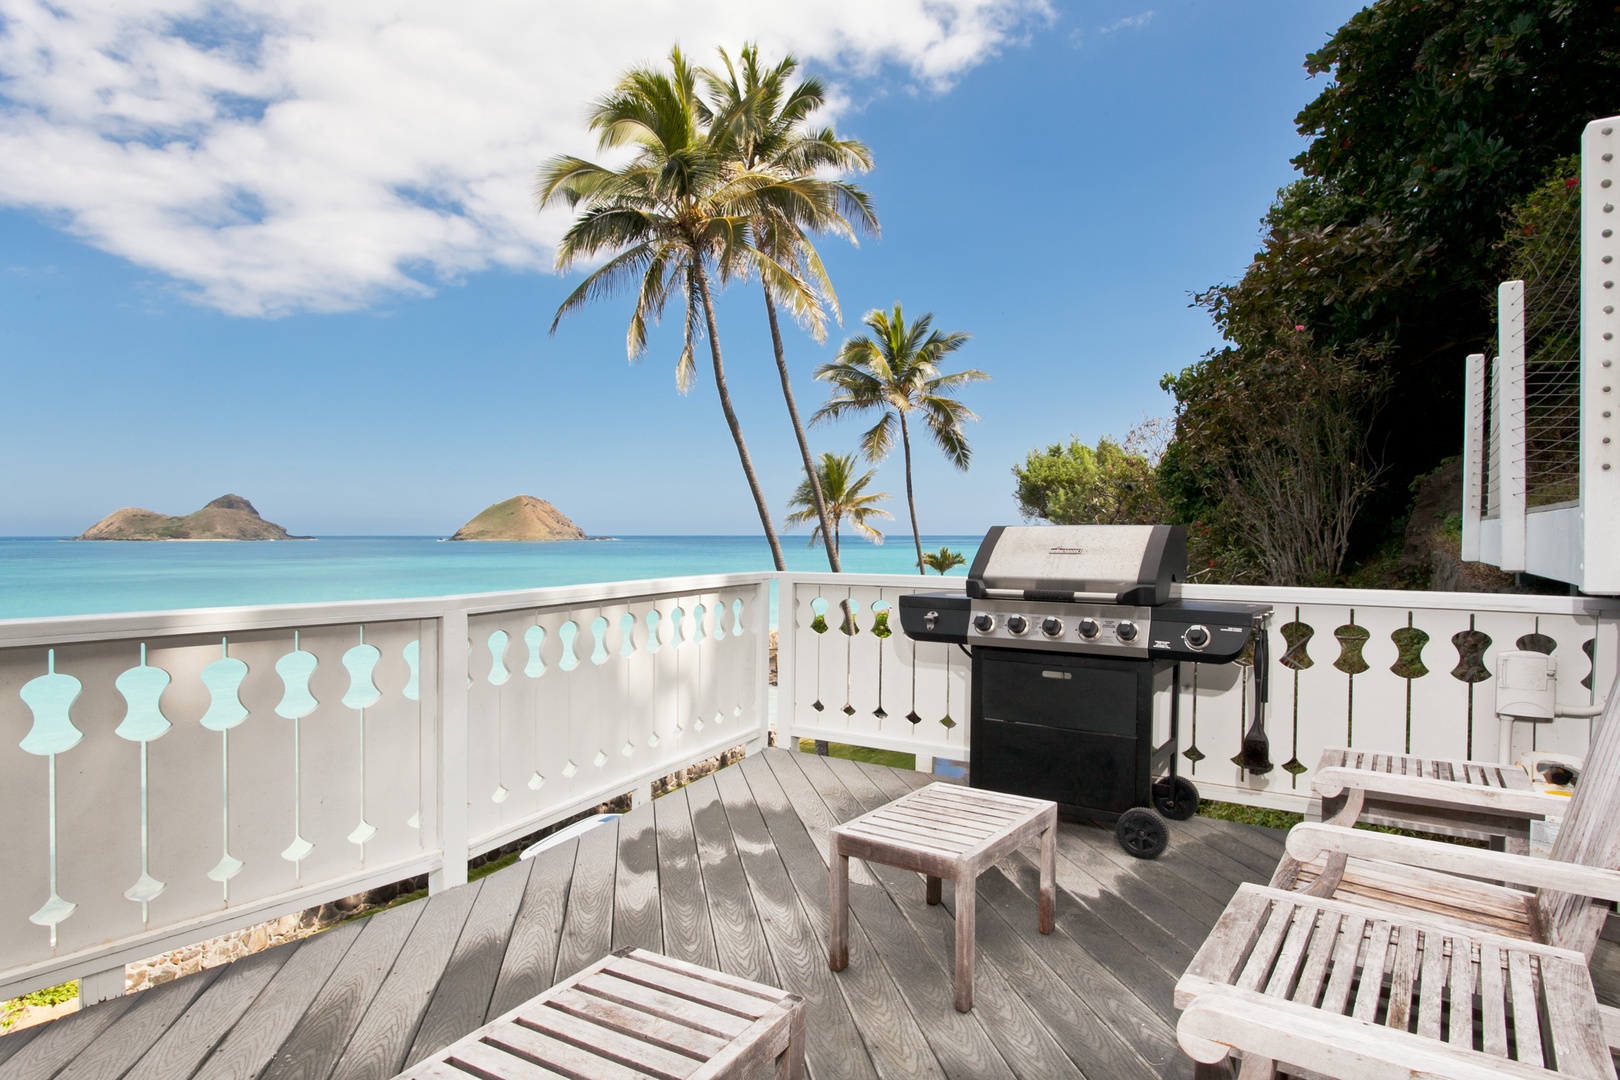 Kailua Vacation Rentals, Hale Mahina Lanikai* - Lanai with a gas grill for cooking dinner by the beach!